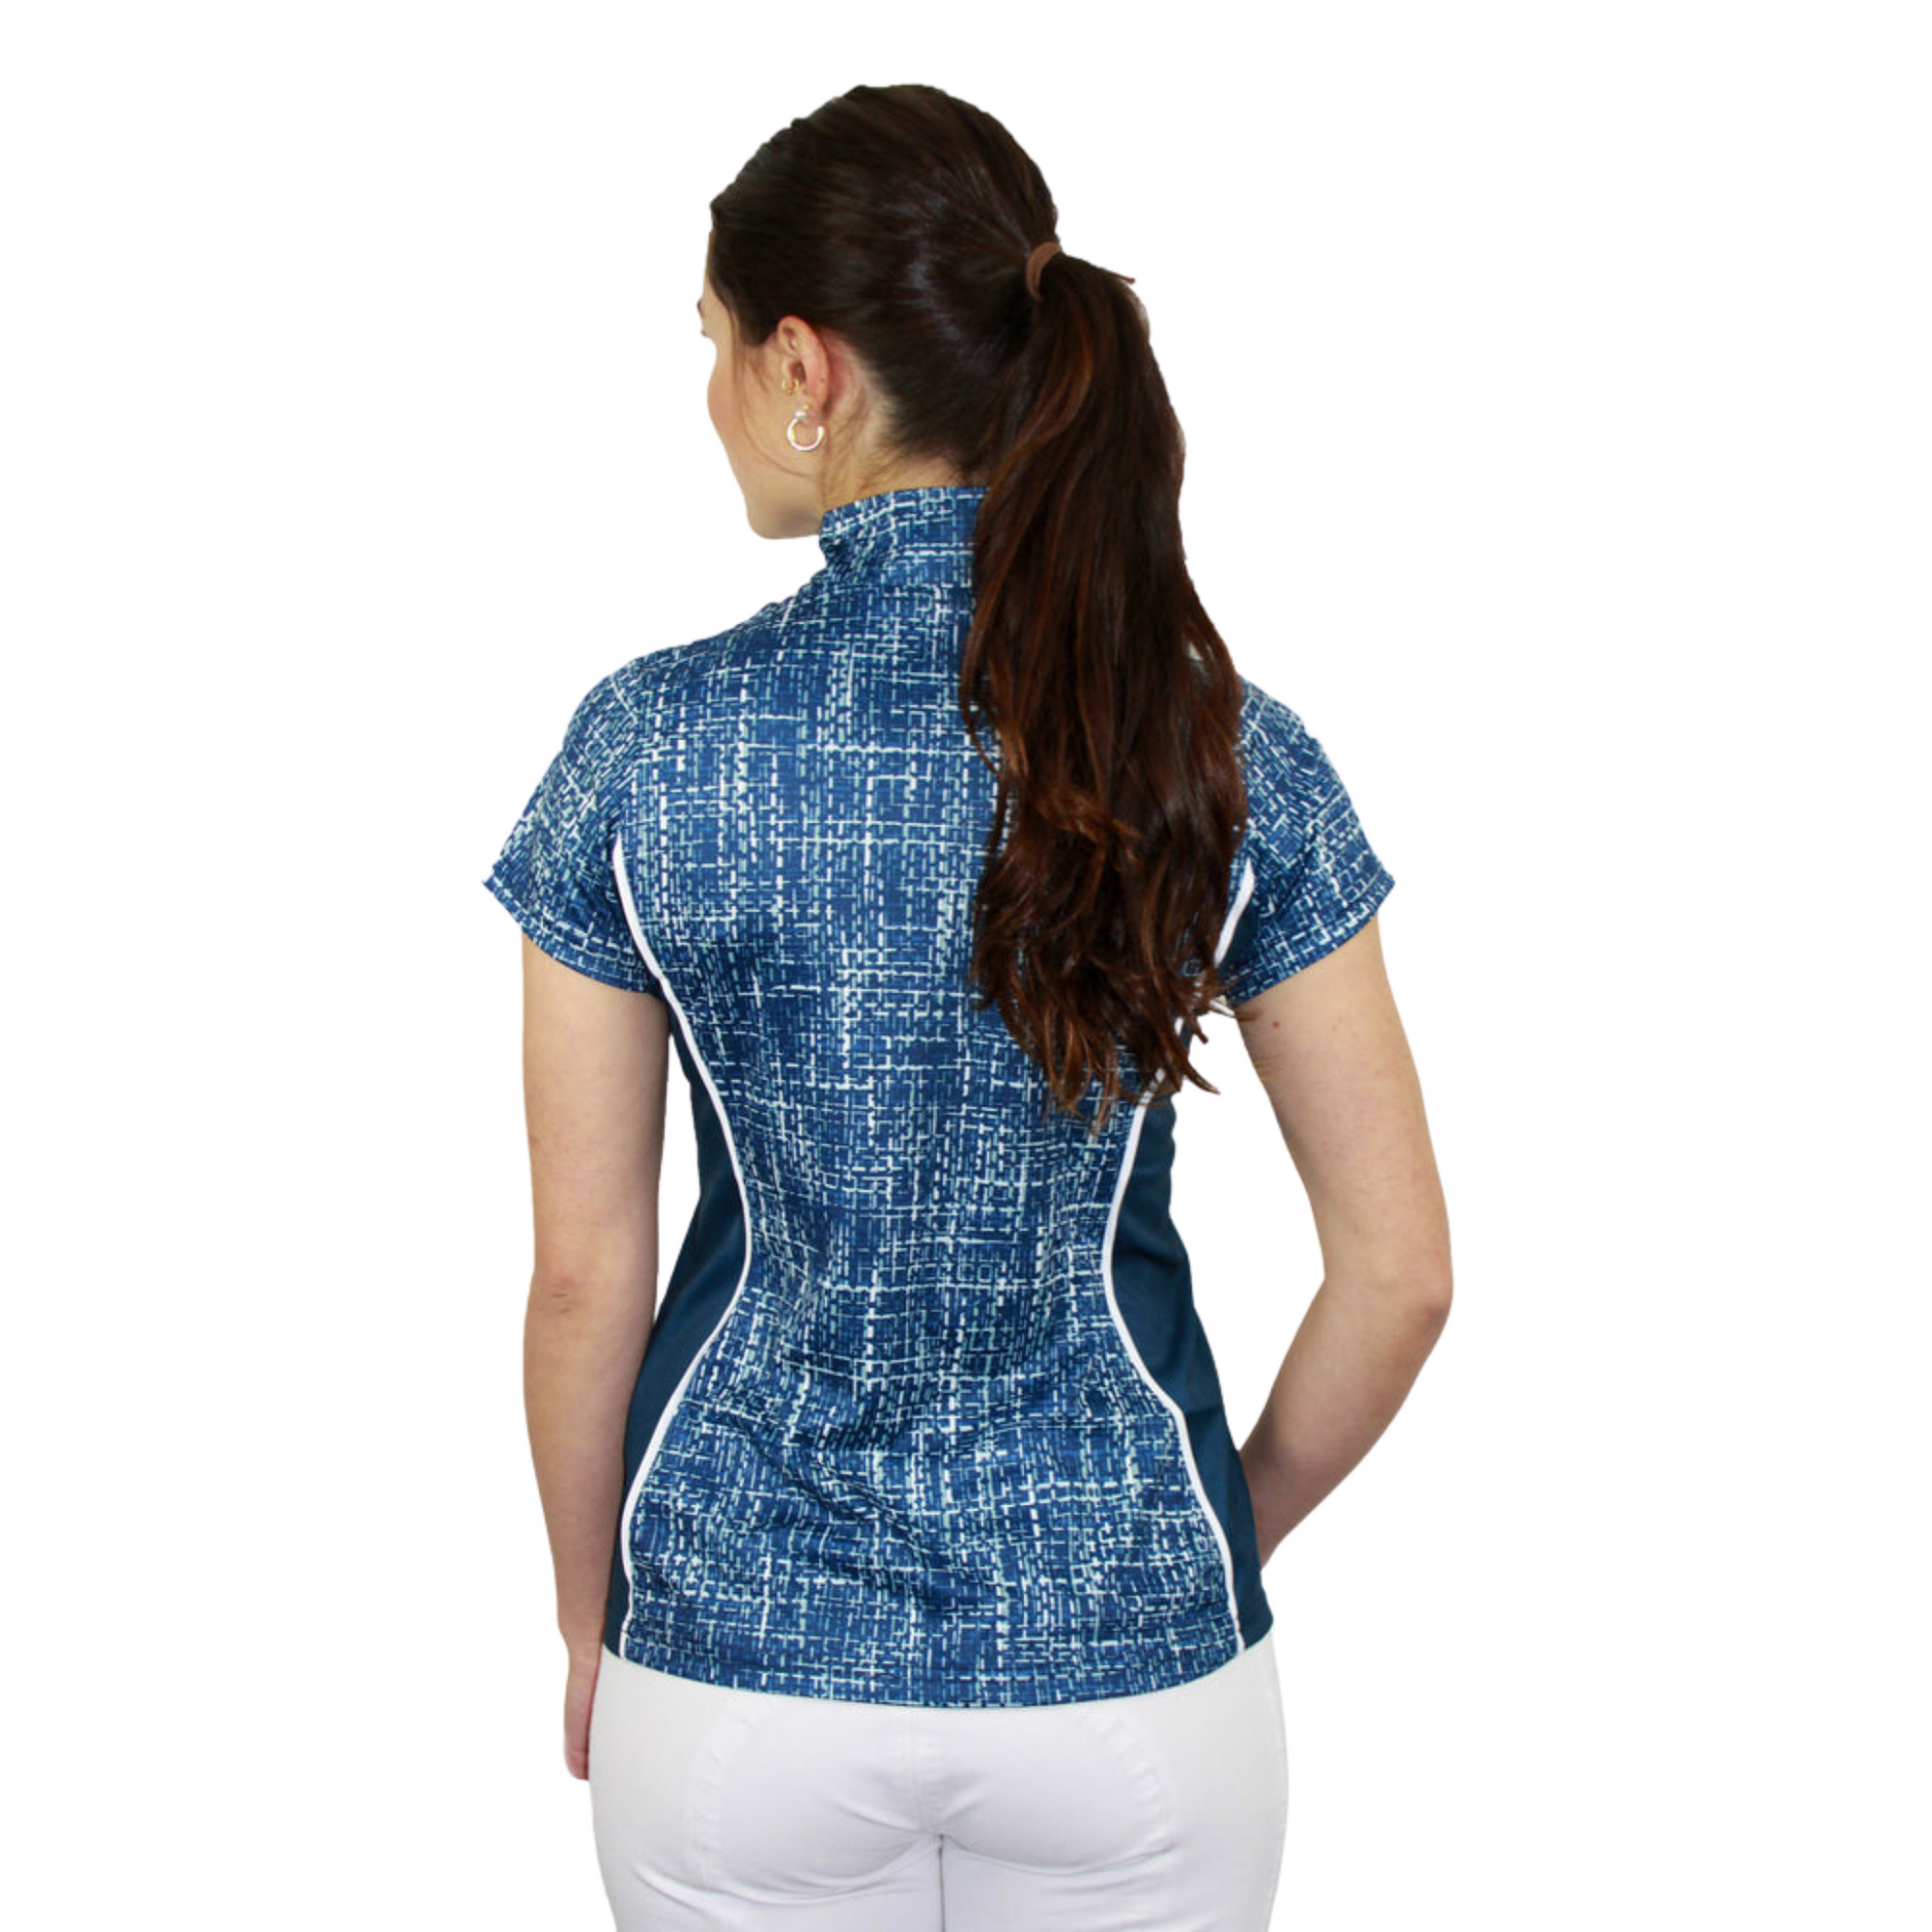 lady wearing blue and white short sleeve equestrian top